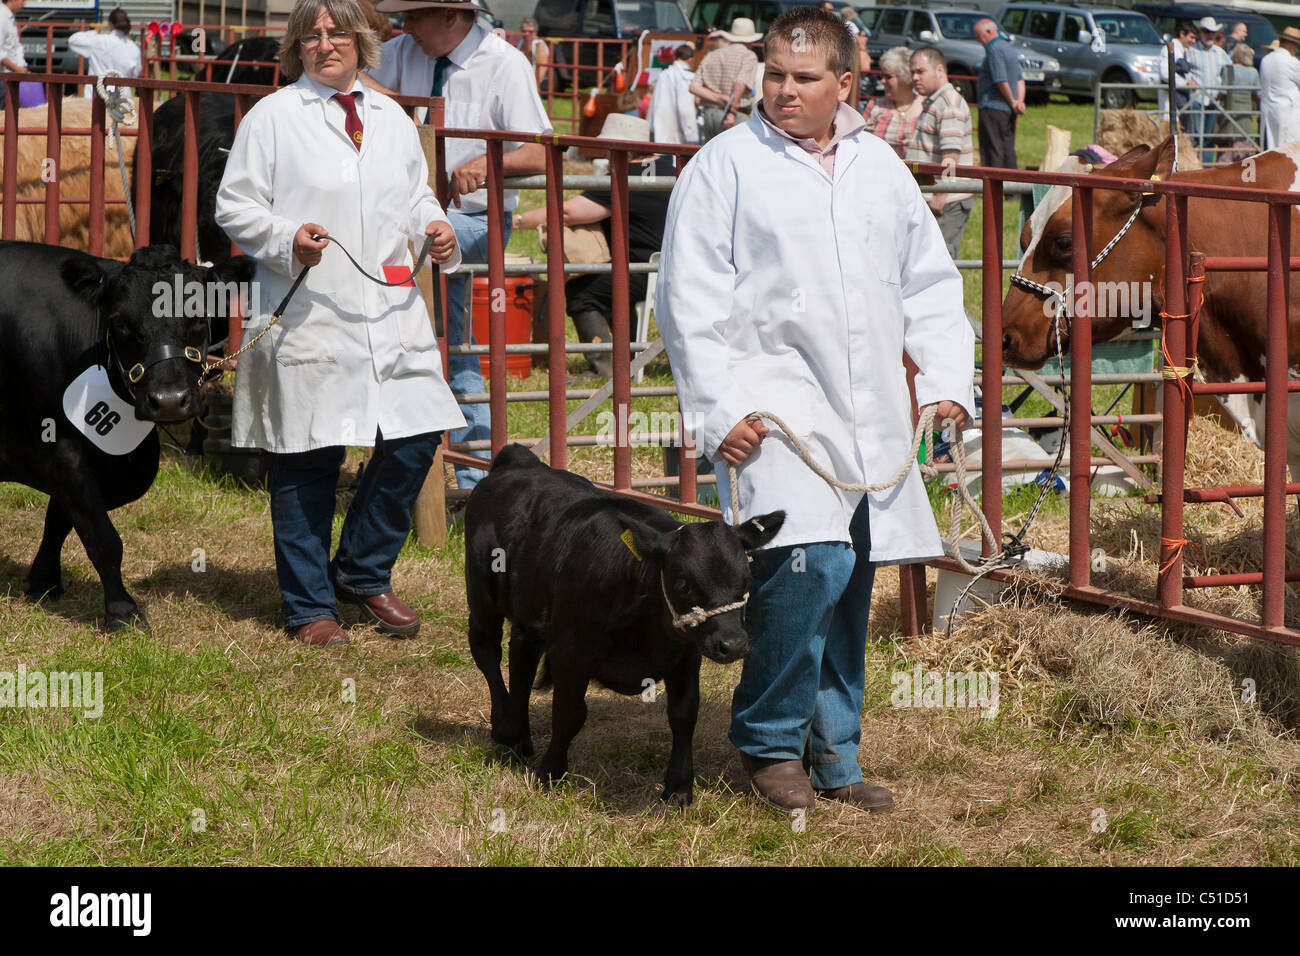 ENTRANTS IN AGRICULTURAL SHOW CHEPSTOW MONMOUTHSHIRE WALES UK Stock Photo